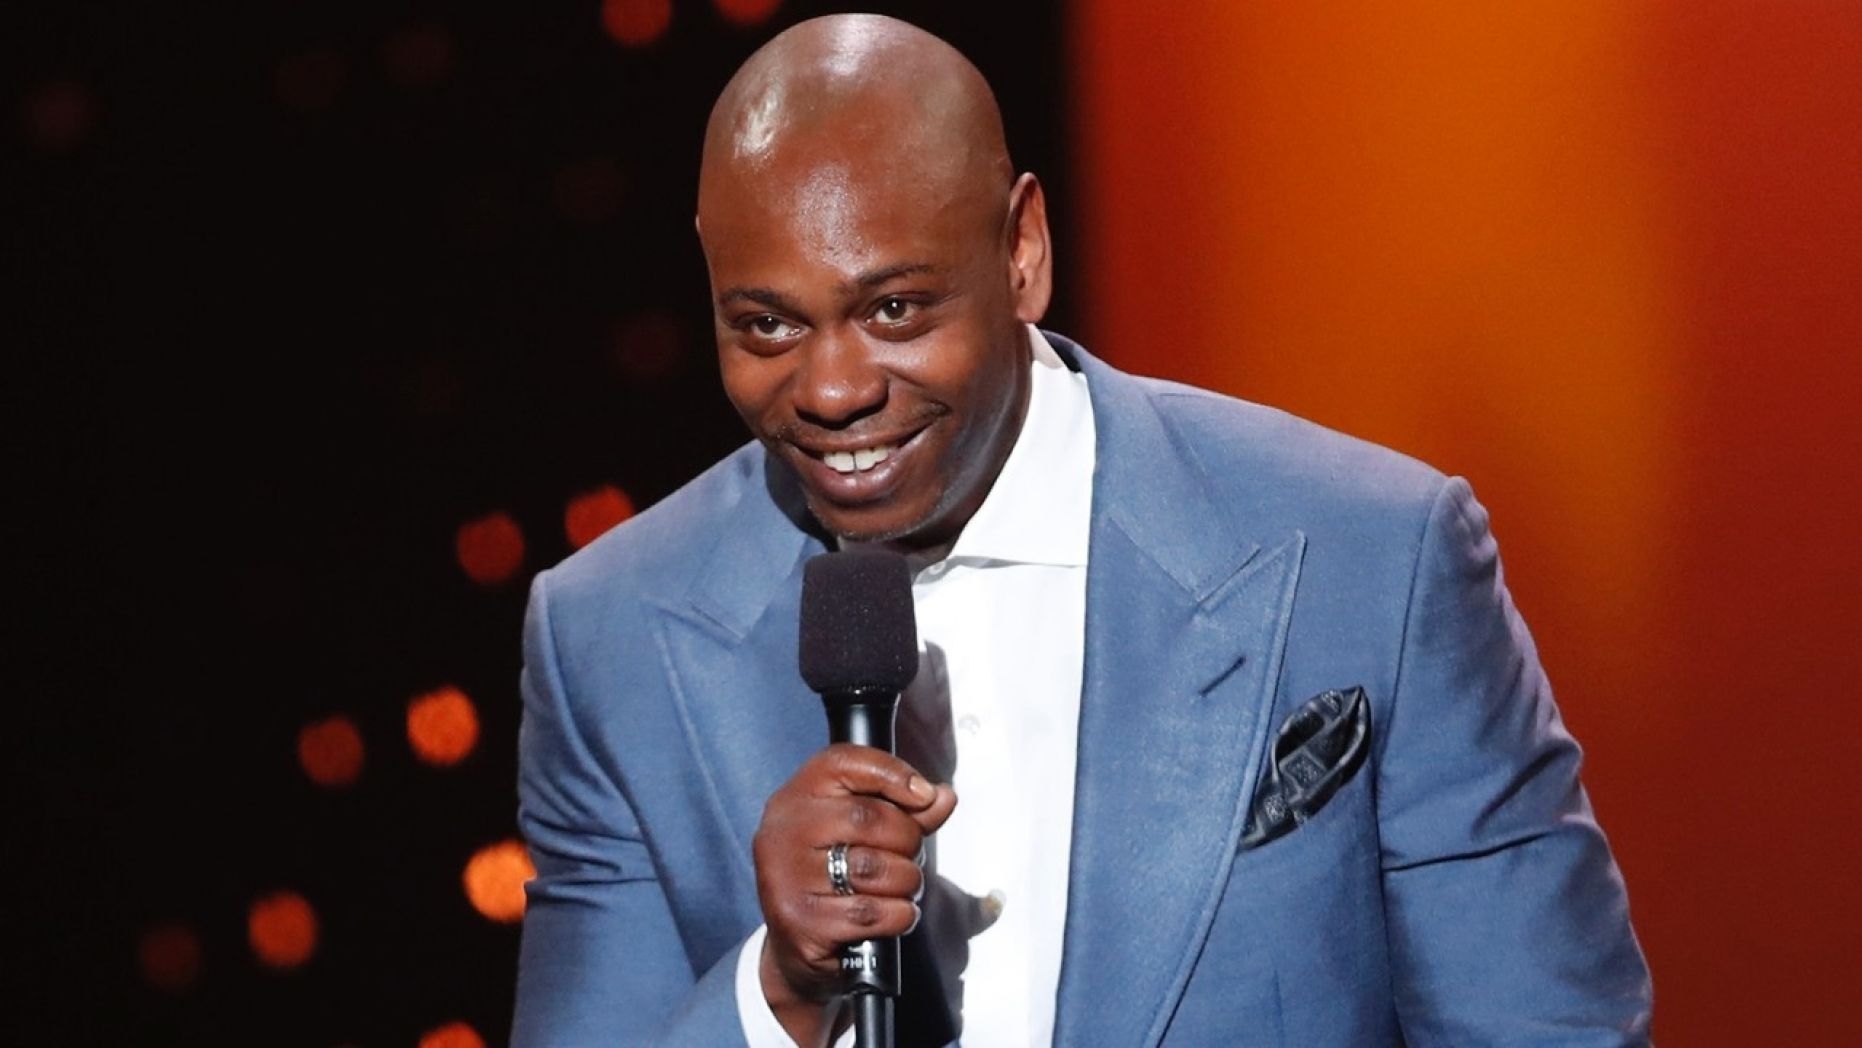 Dave Chappelle addresses trans joke backlash, goes in on Trump voters in special